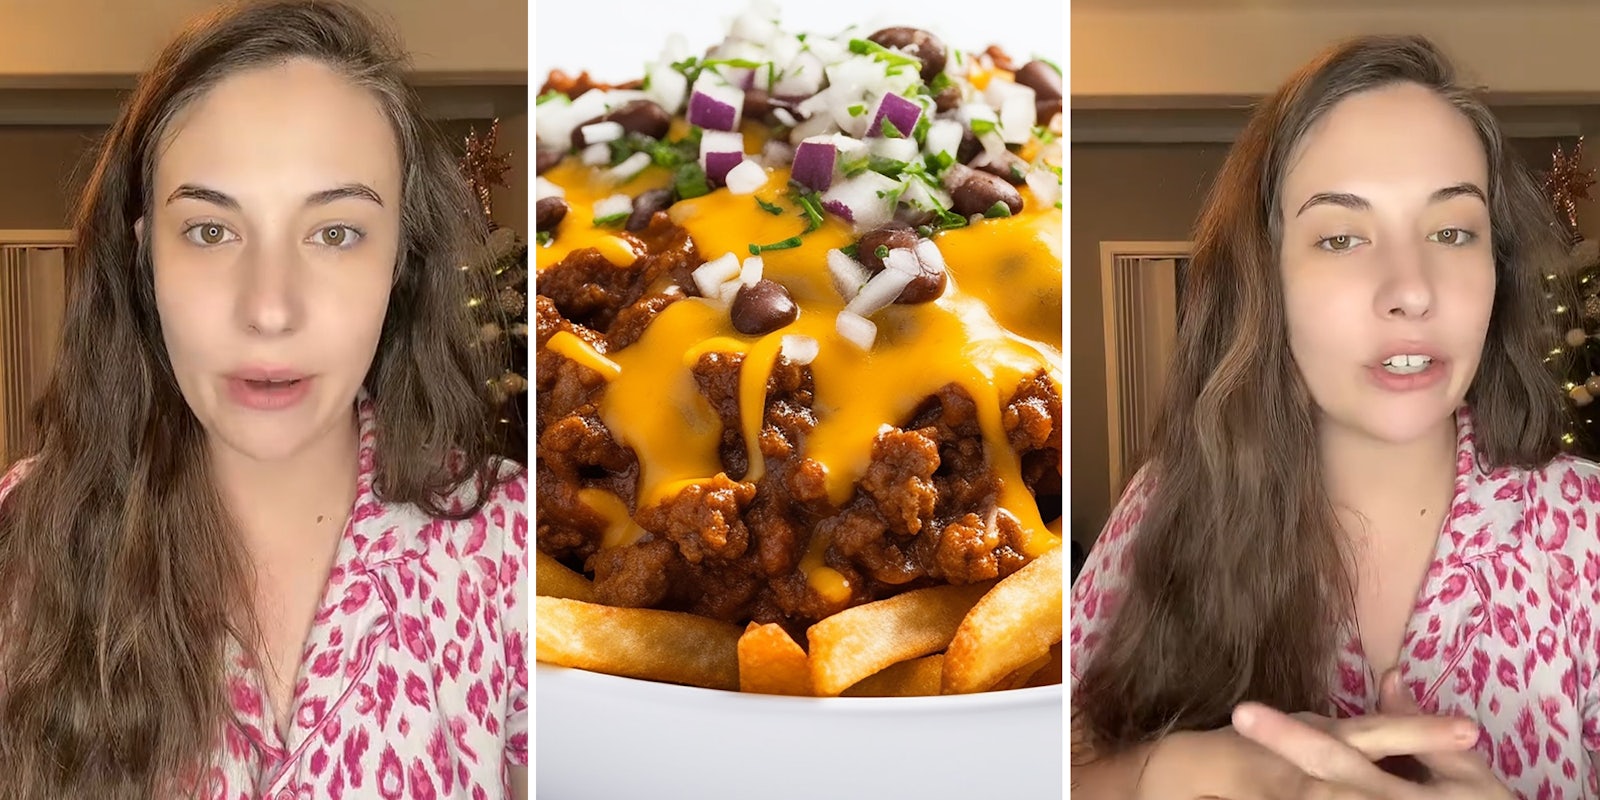 Bartender’s manager issues lifetime ban for customer who lied about chili cheese fries